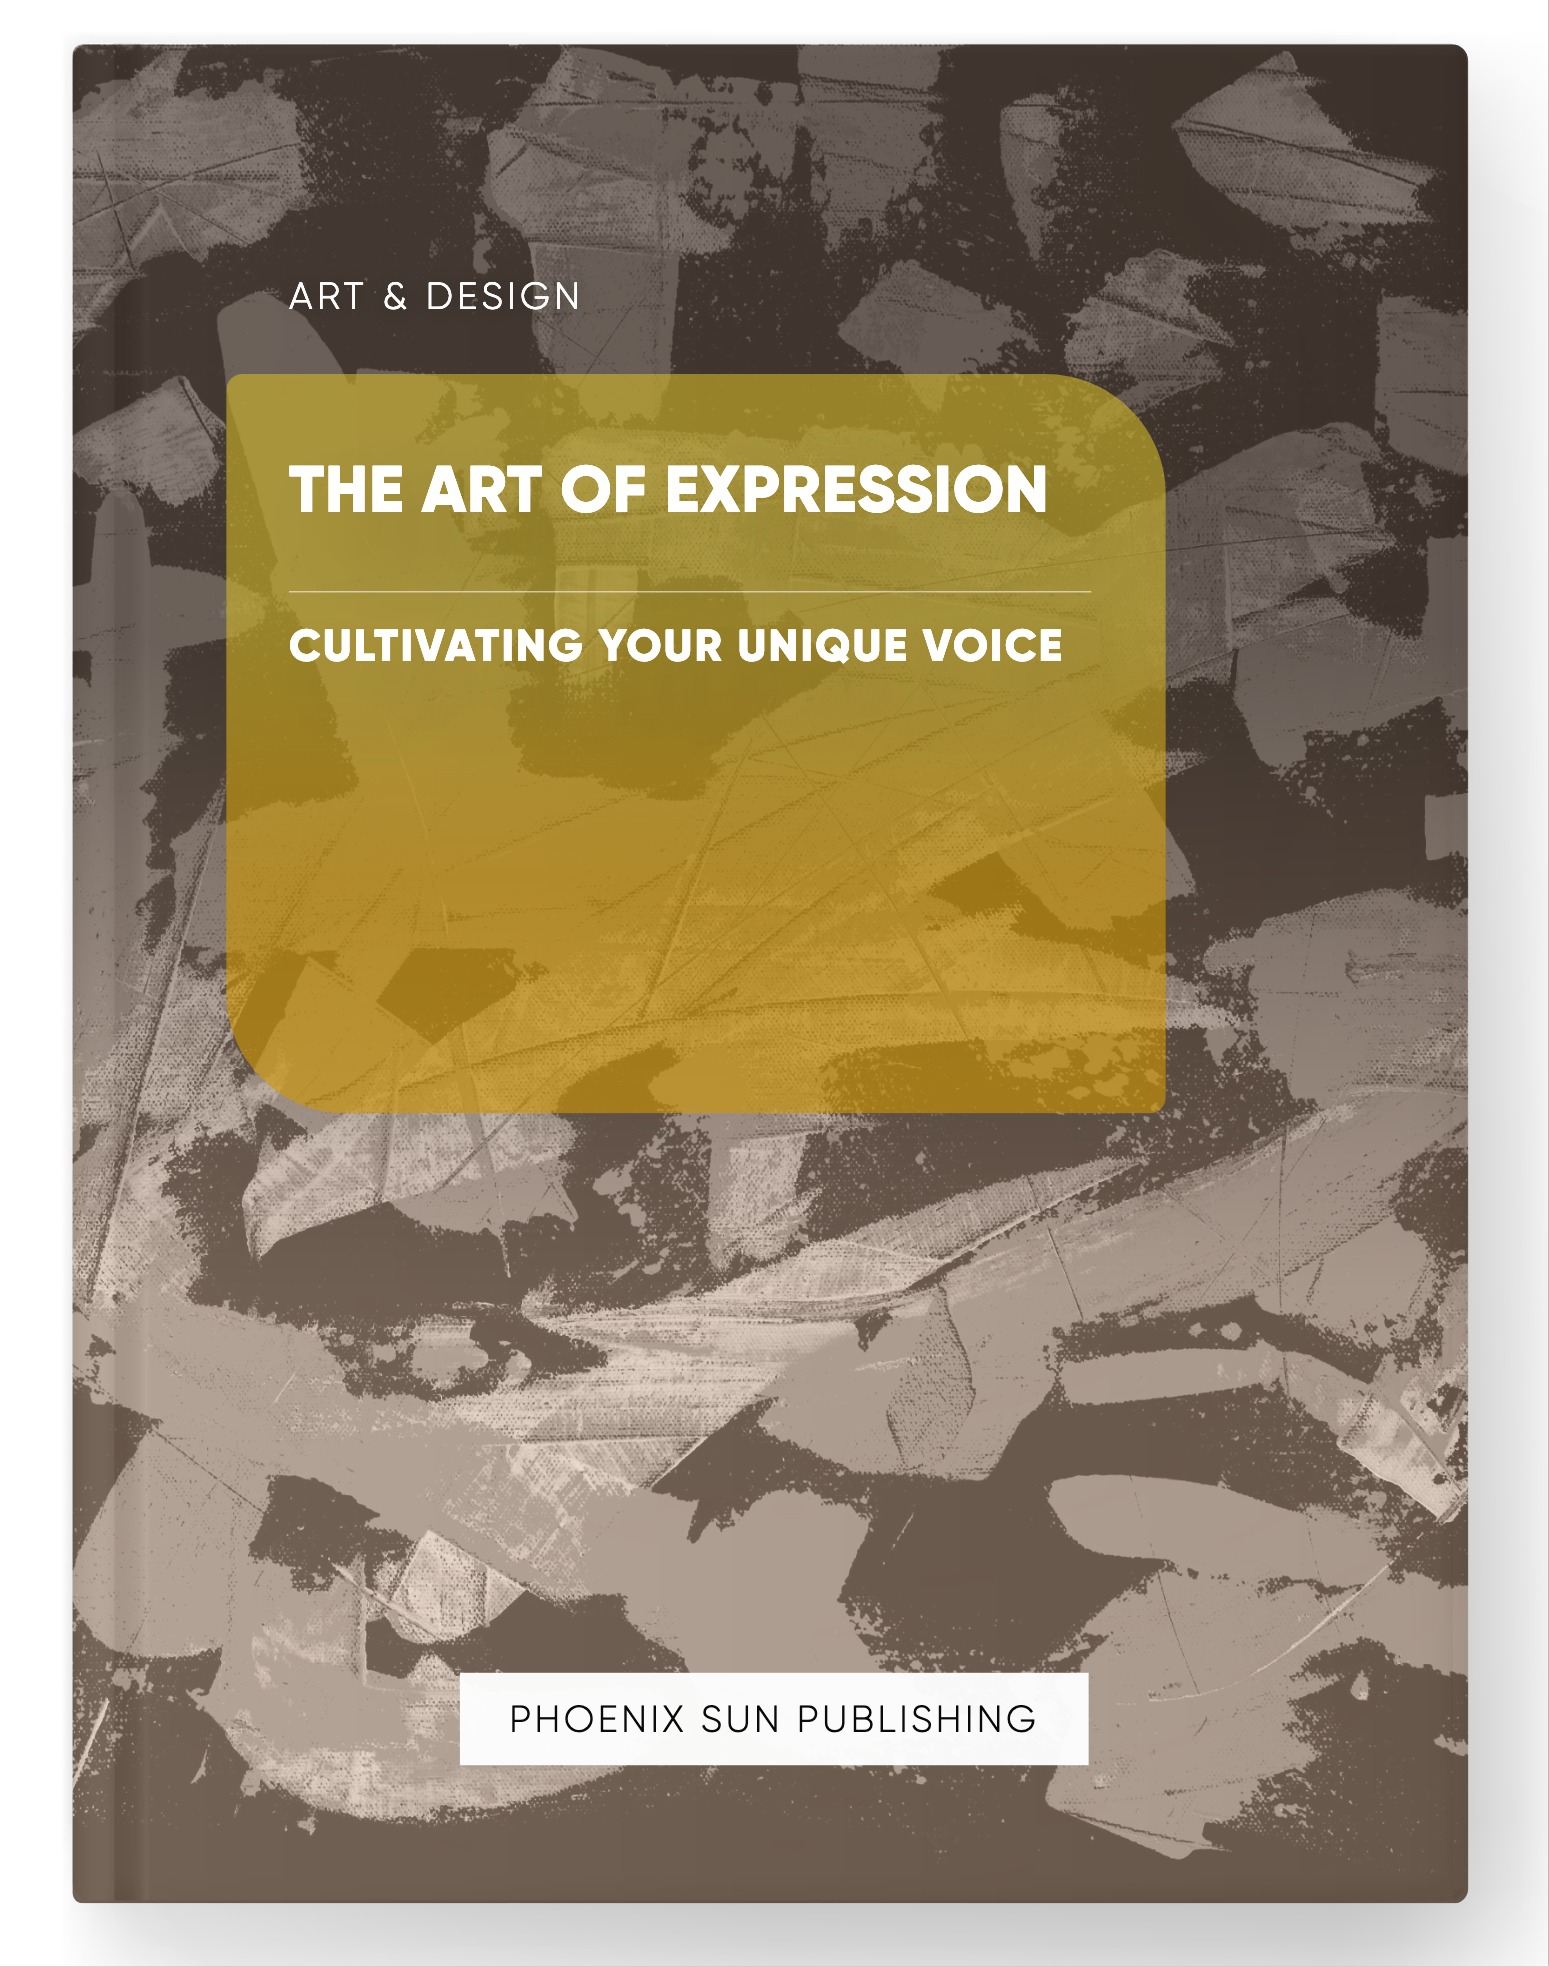 The Art of Expression – Cultivating Your Unique Voice